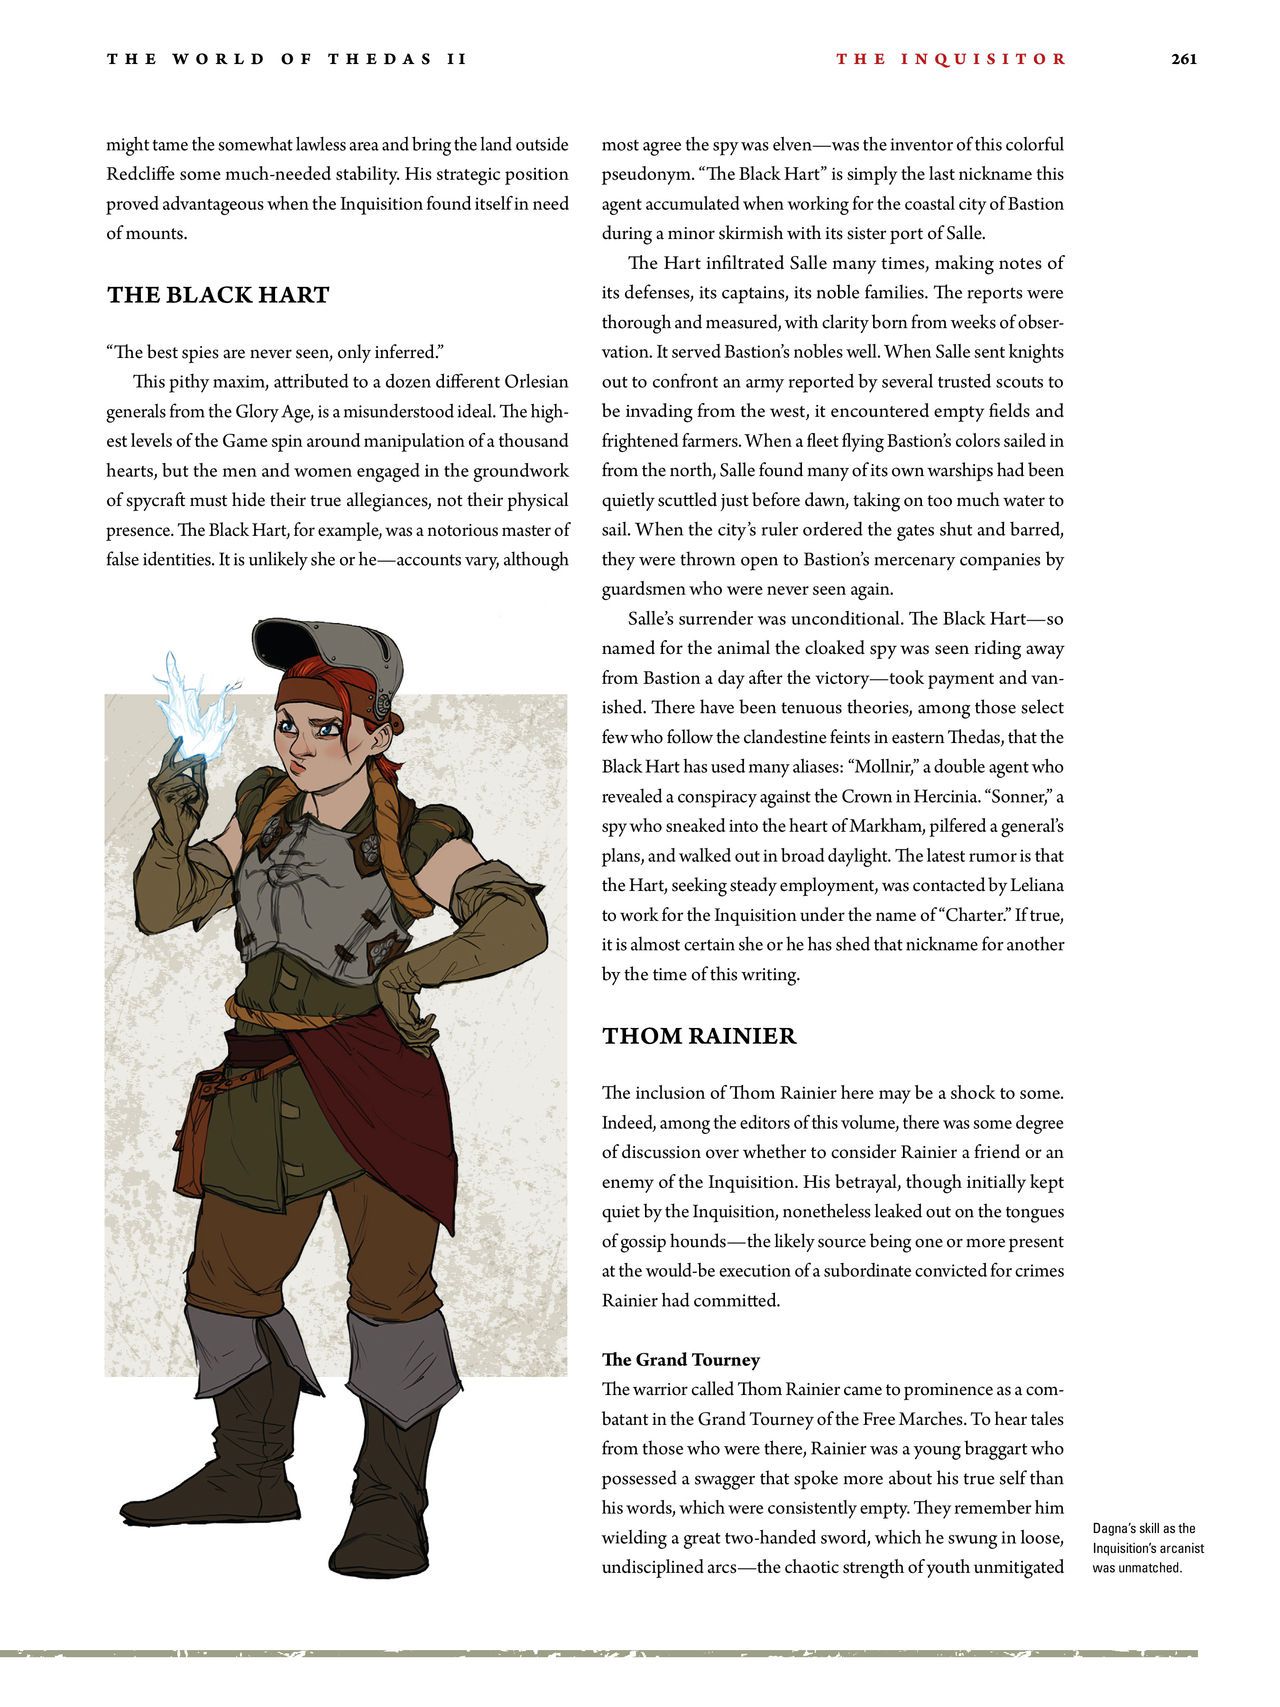 Dragon Age - The World of Thedas v02 254